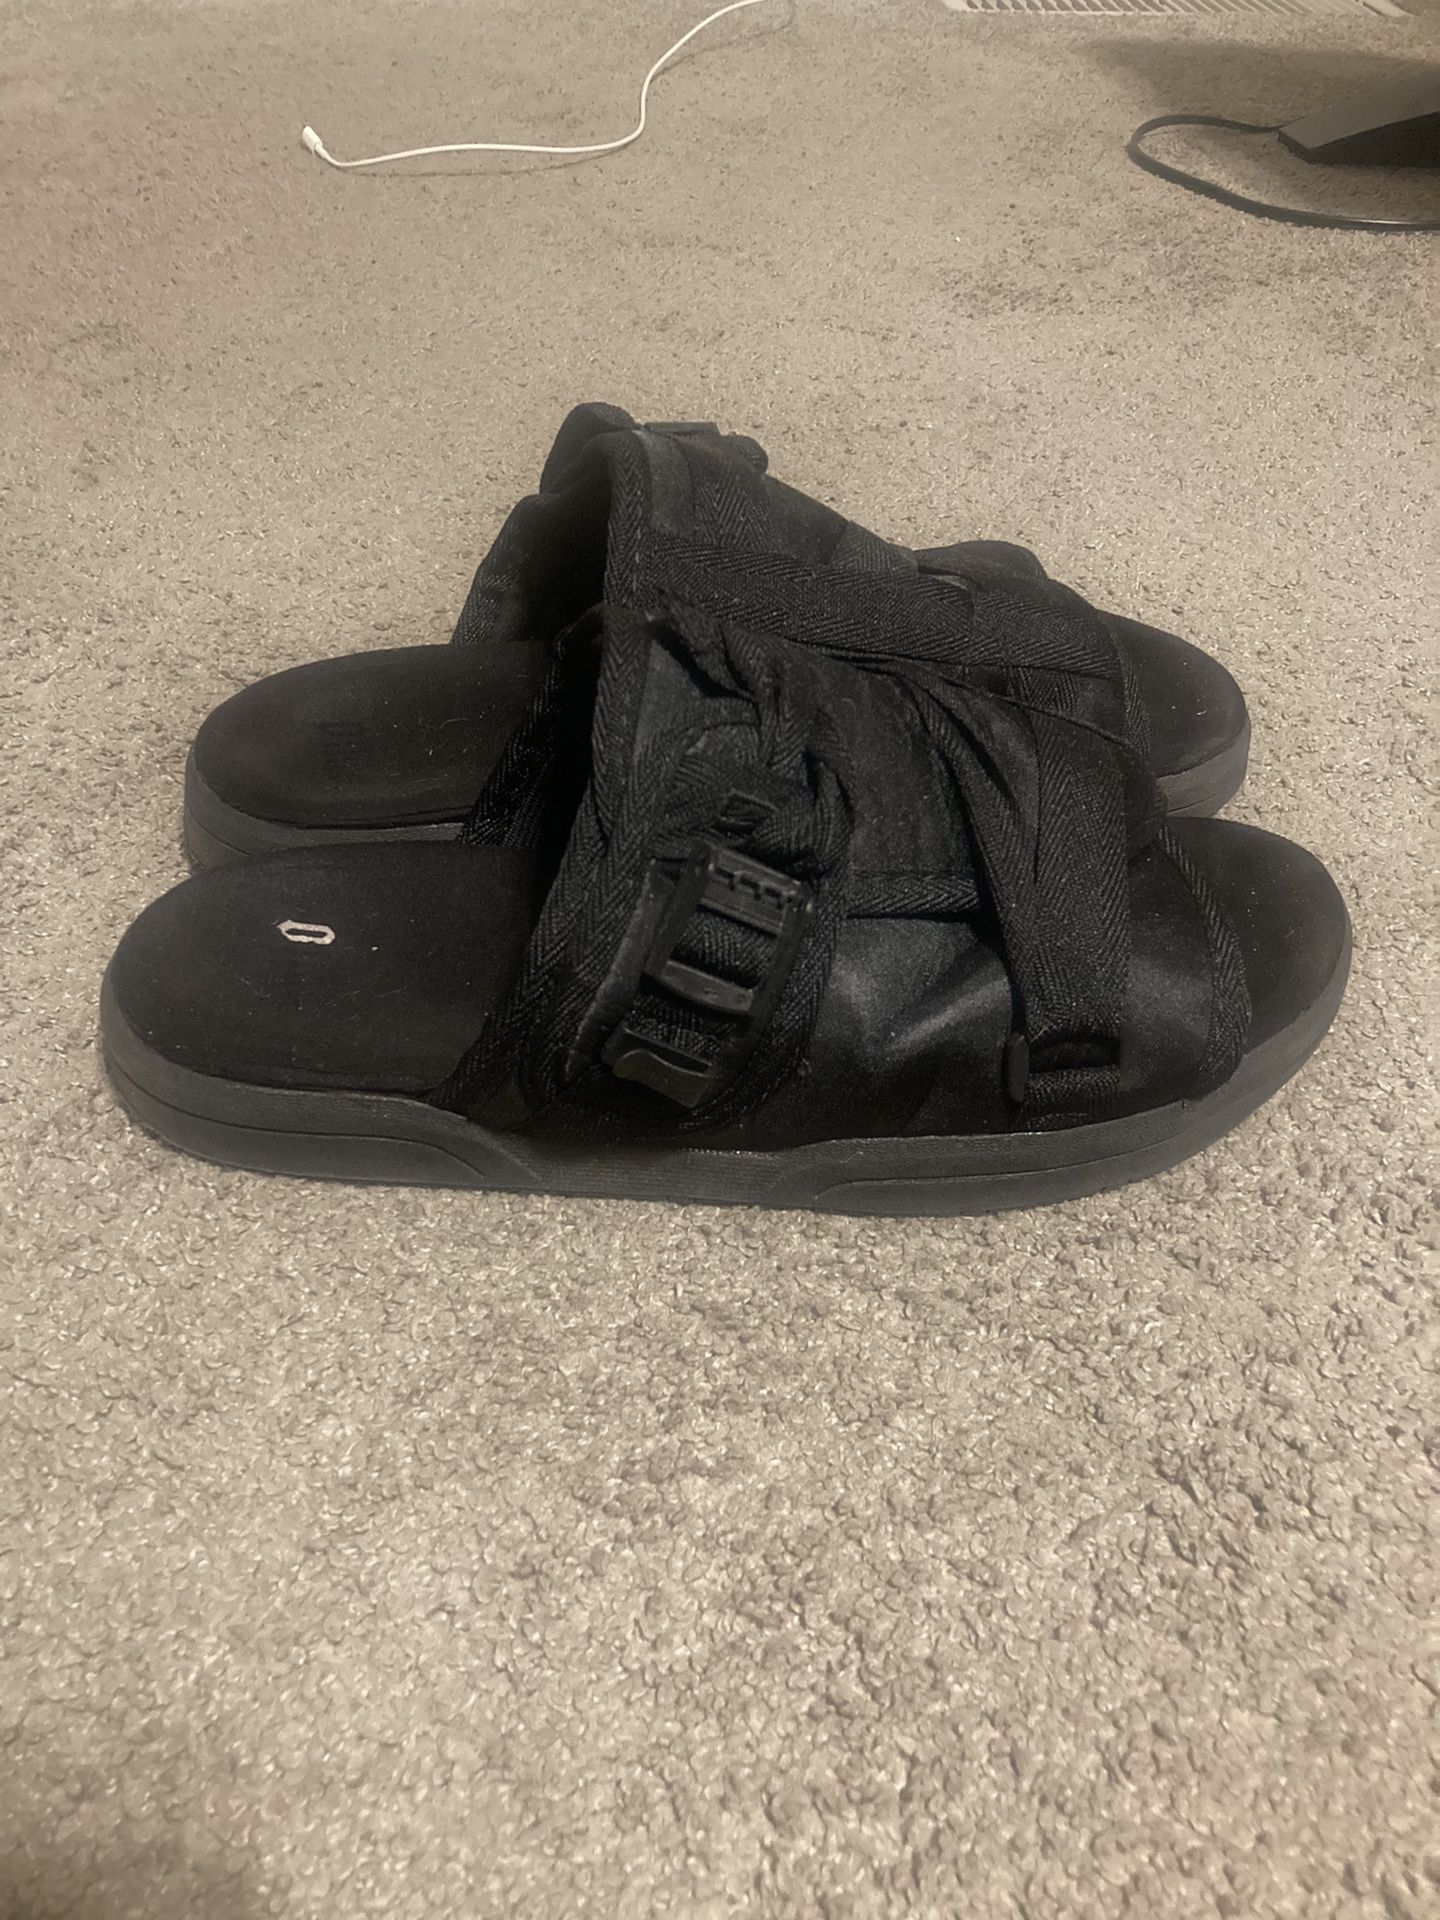 Ollic Slides - Size 10 Men for Sale in Pittsburg, CA - OfferUp